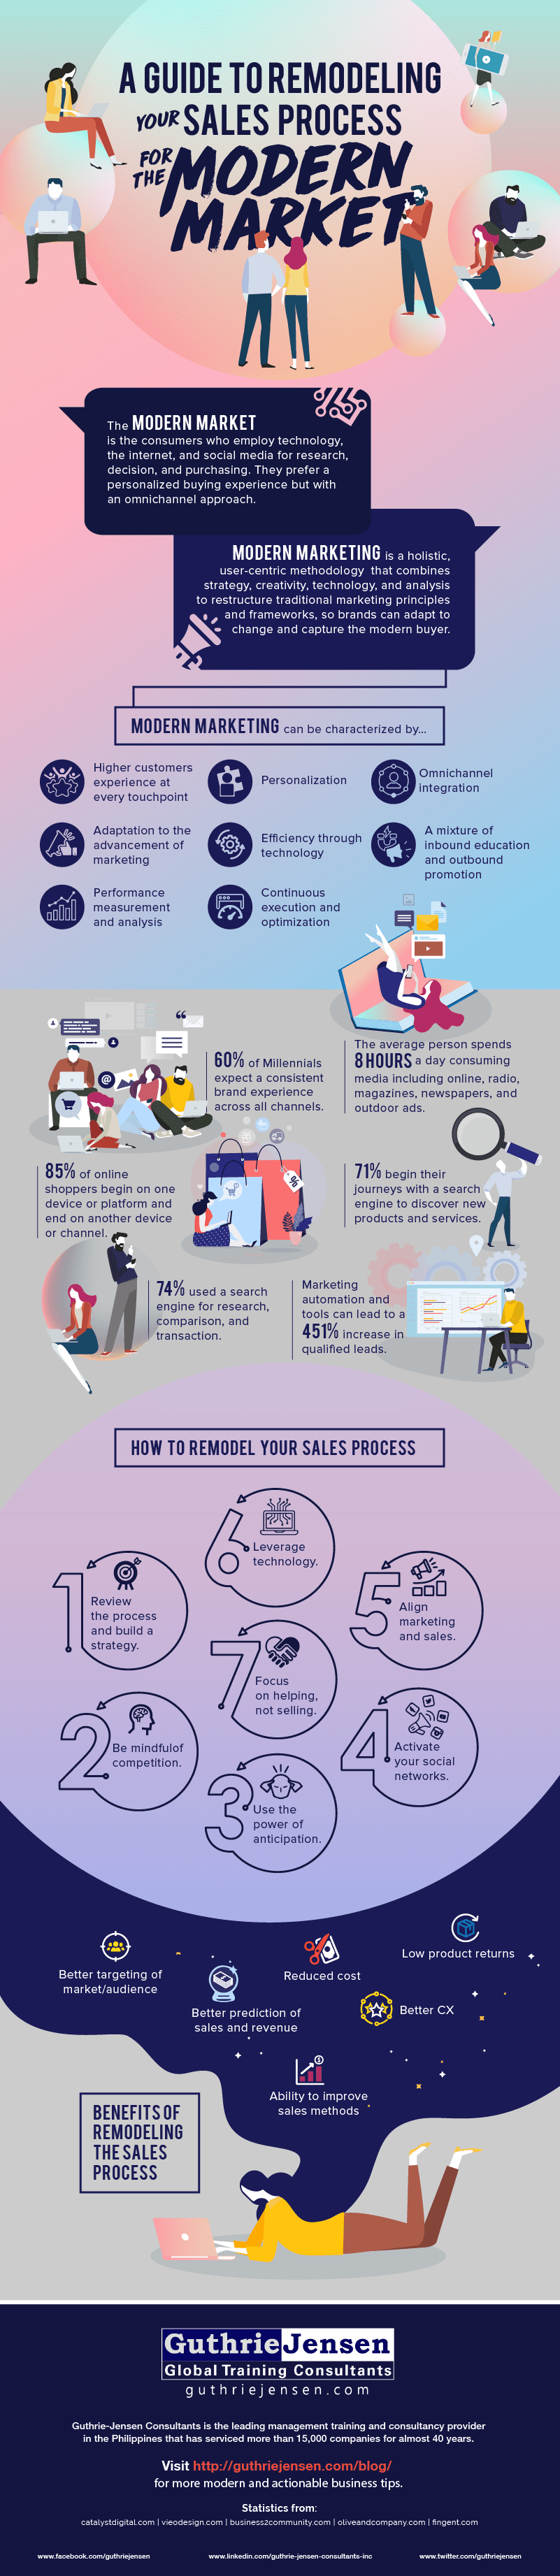 A Guide to Remodeling Your Sales Process for the Modern Market Infographic